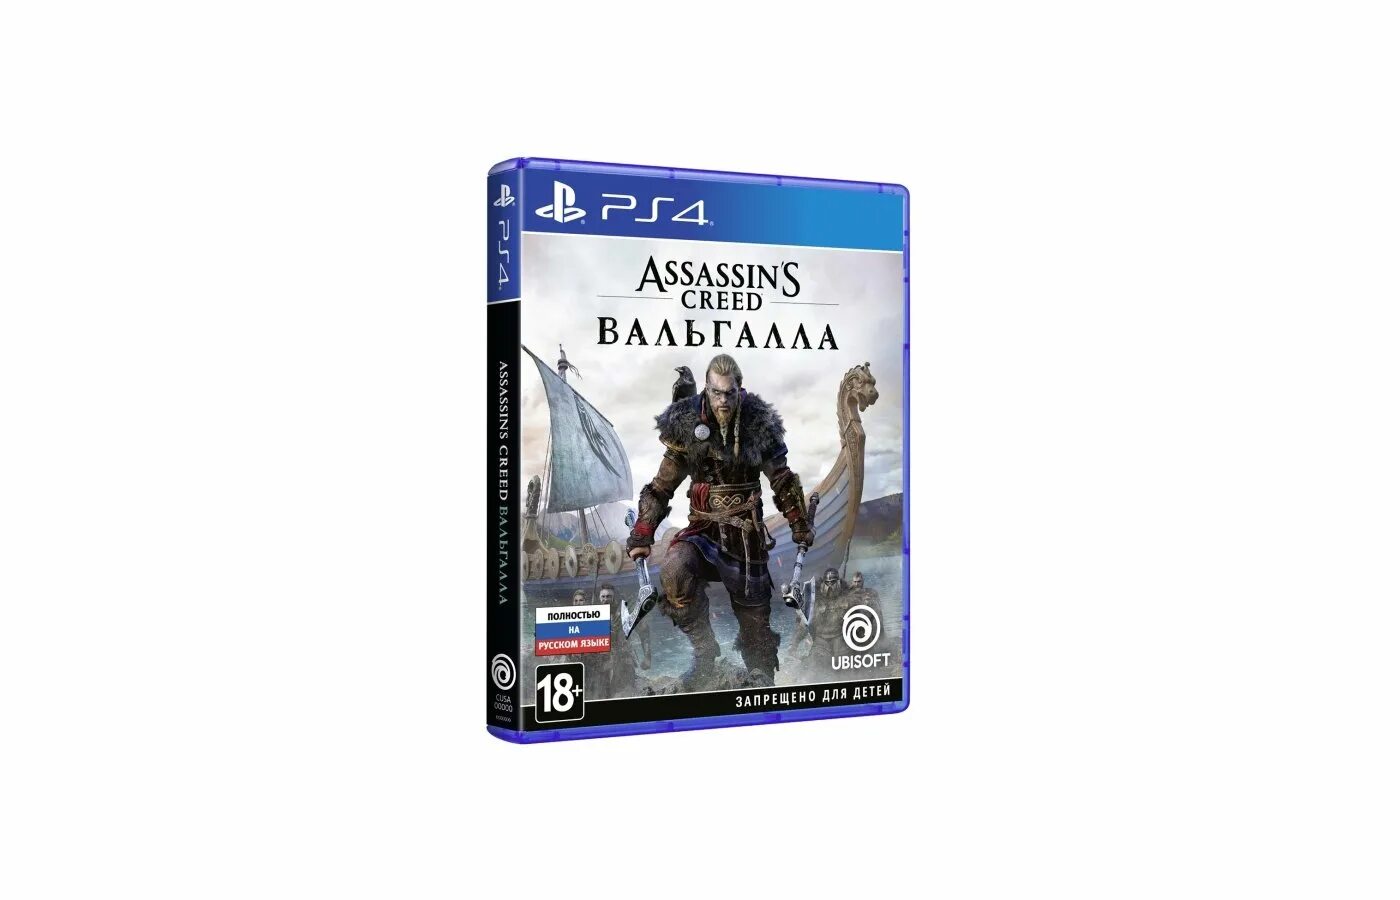 Assassins игра ps4. Assassin's Creed Valhalla ps4. Ассасин Крид диск на ПС 4. Ассасин Крид Вальхалла ps4. Assassin's Creed Valhalla ps4 диск.